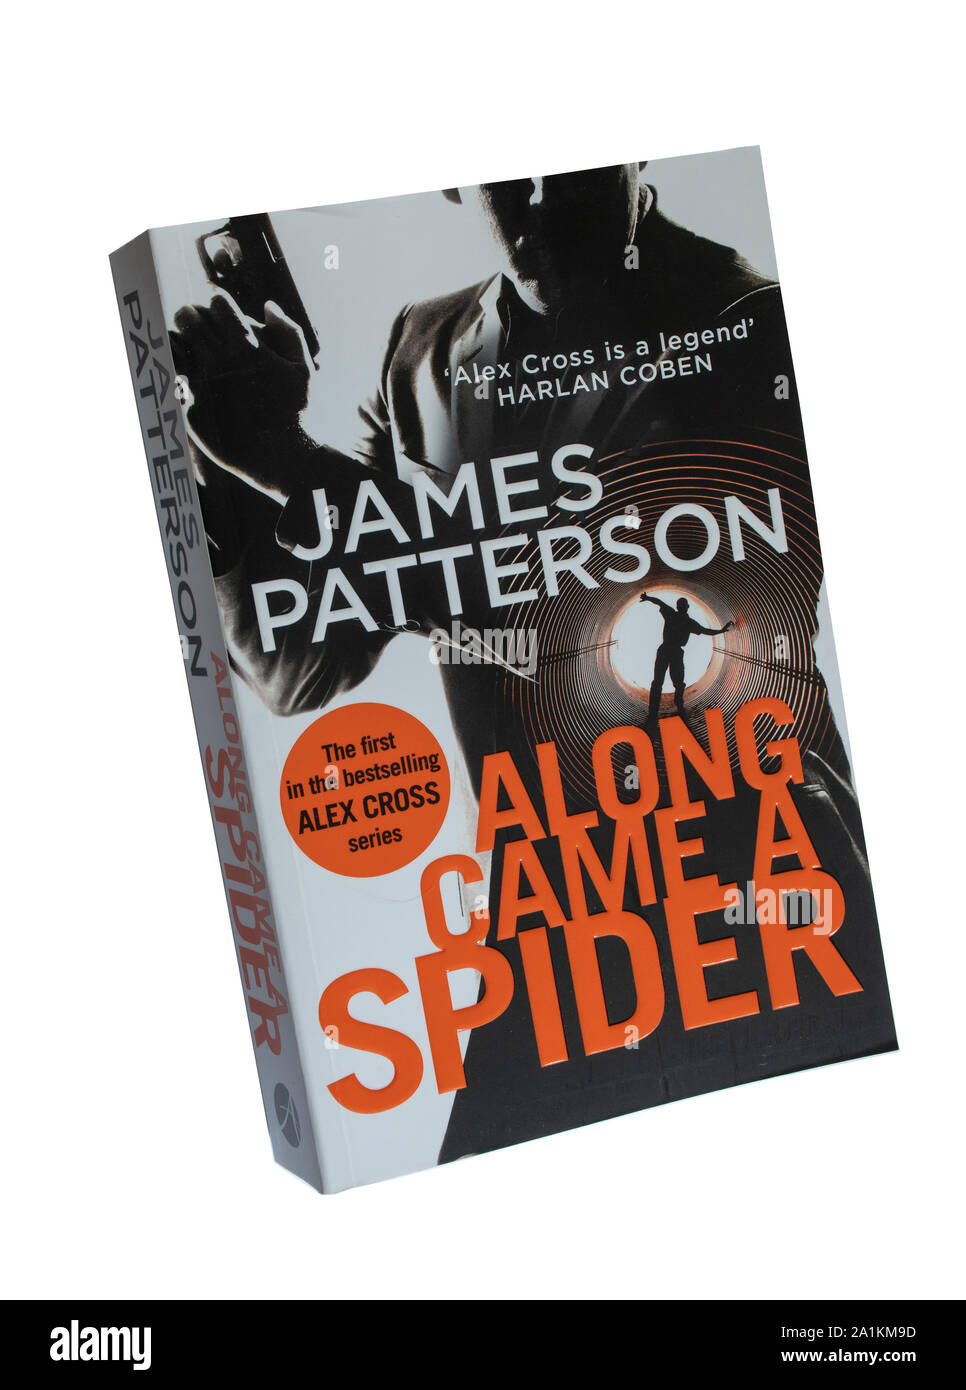 Along came a spider, a paperback book or novel by James Patterson, the first book in the Alex Cross series Stock Photo